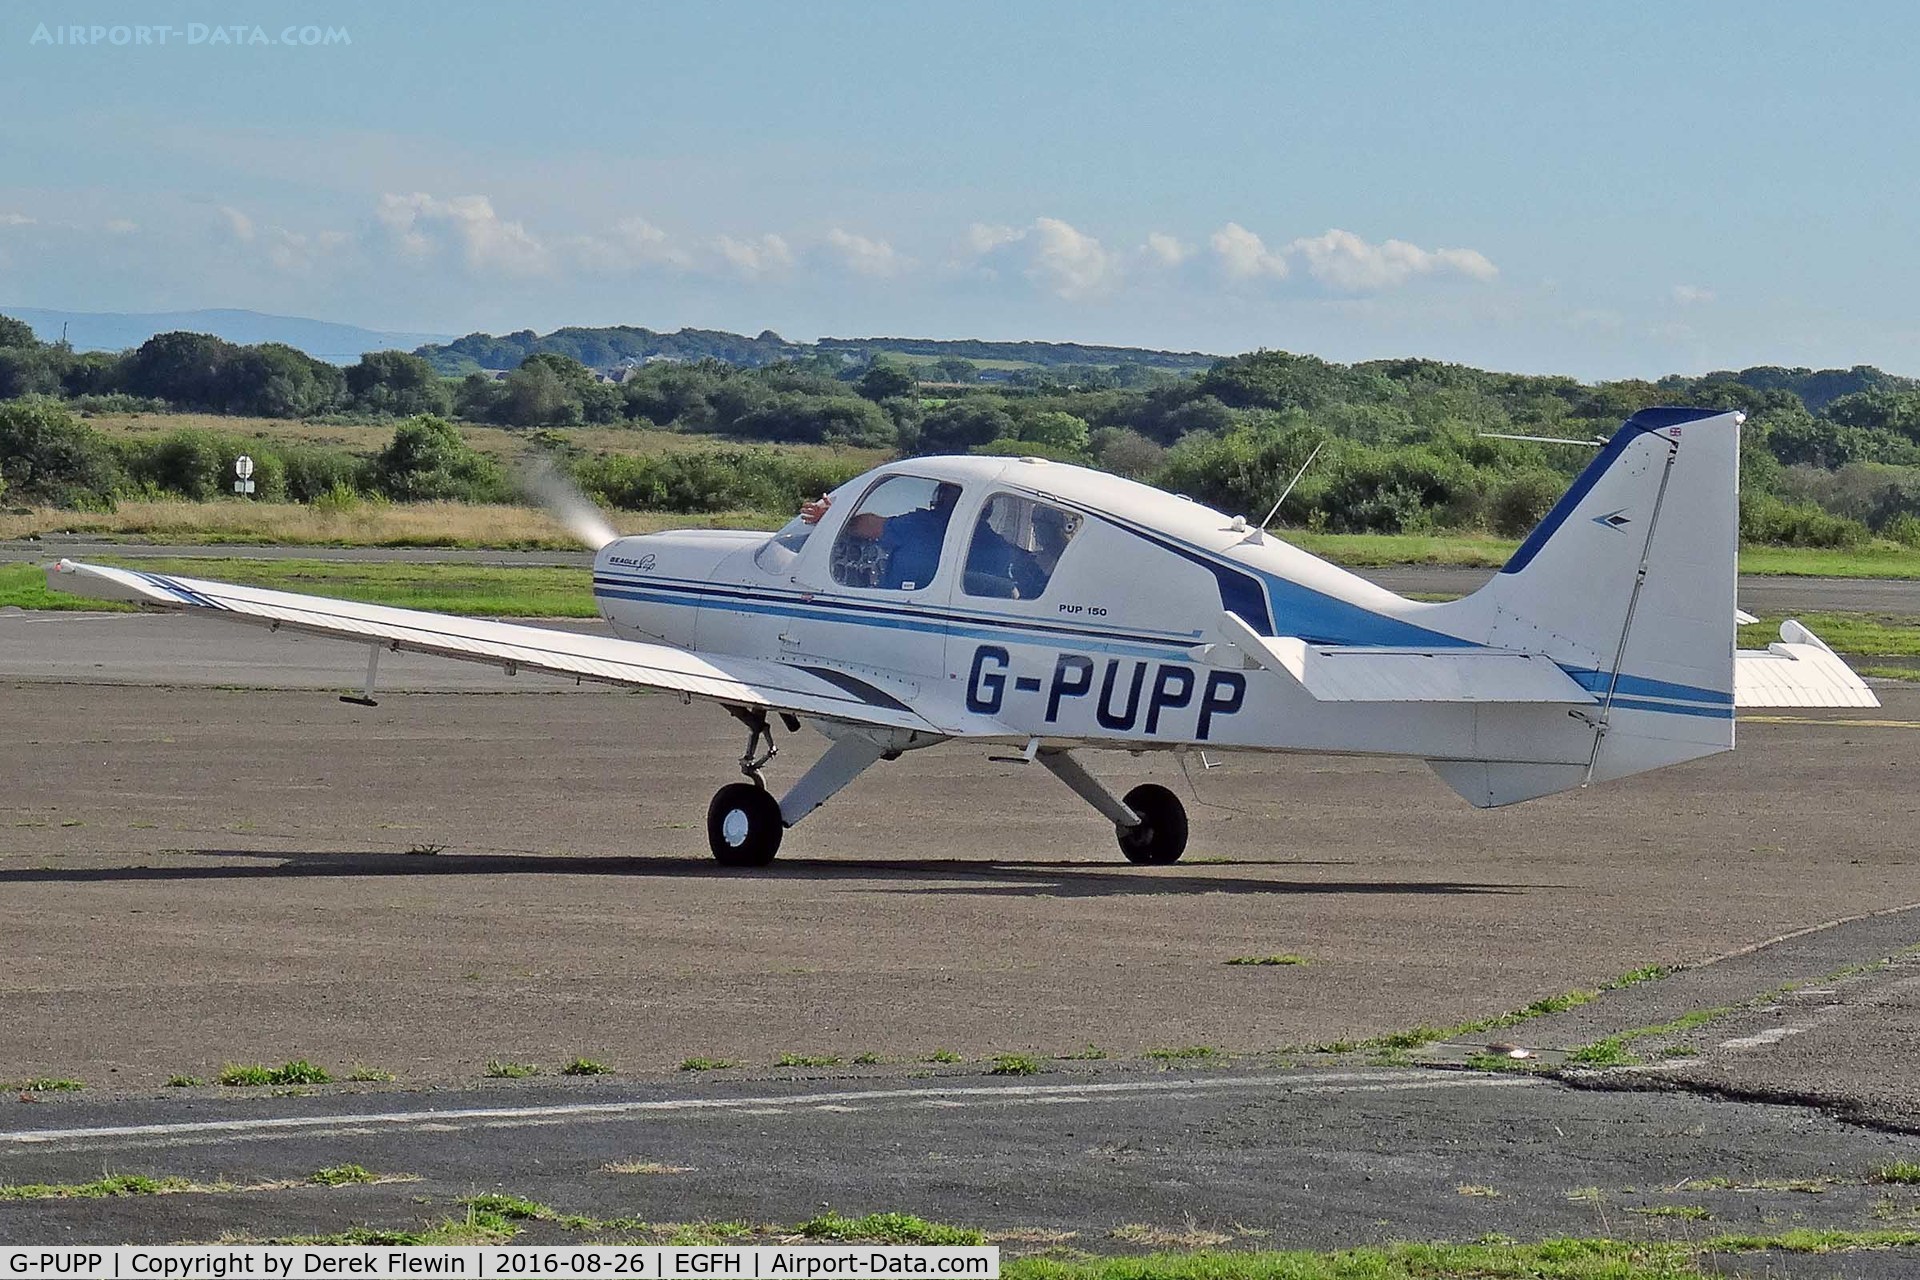 G-PUPP, 1973 Beagle B-121 Pup Series 2 (Pup 150) C/N B121-174, Pup, Swansea resident, previously G-BASD, seen taxxing in after local flight.